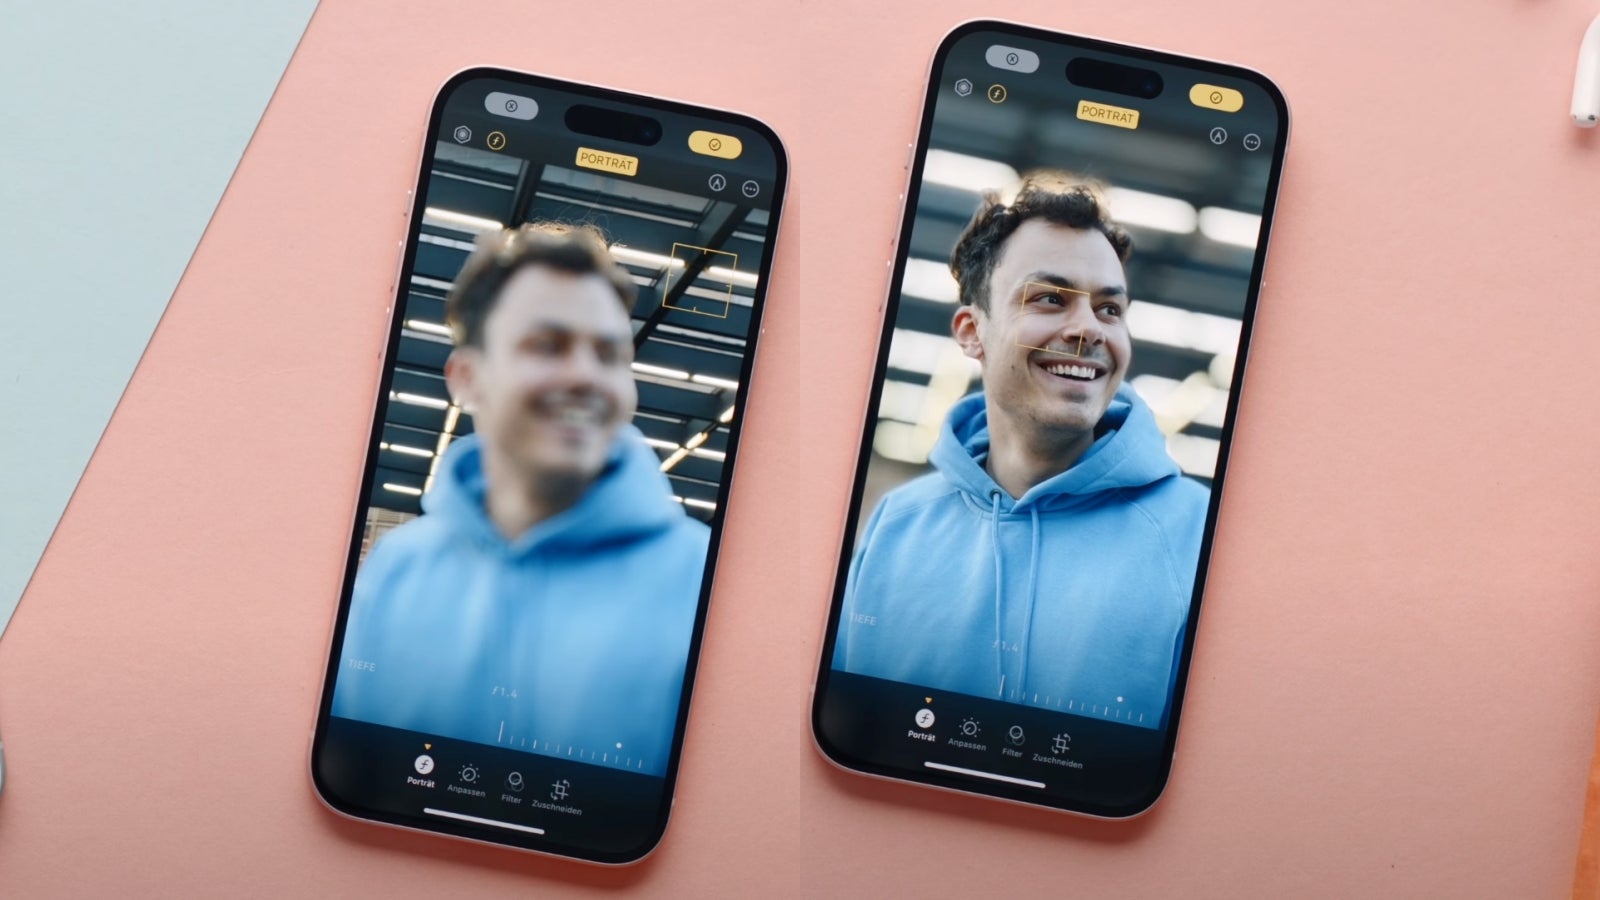 The iPhone 15&#039;s revamped Portrait mode lets you take a regular photo and add the portrait effect later and change the focus point. You can also take 2x zoom portraits thanks to the 2x virtual lens. - $800 iPhone 15 seems too good to be real: Apple can be super generous when the bar is set low